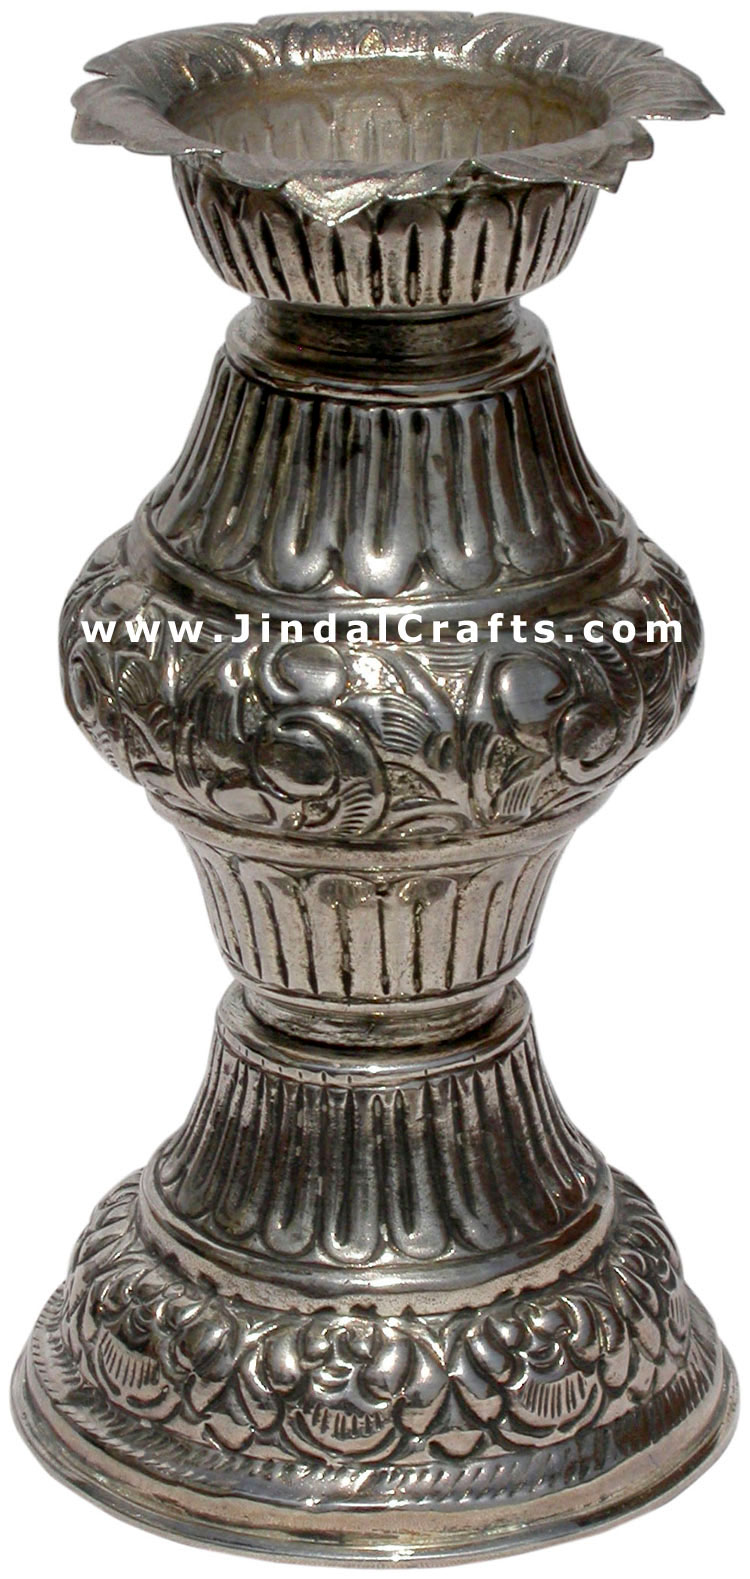 Candle Holder - Hand Carved Silver Plated Traditional